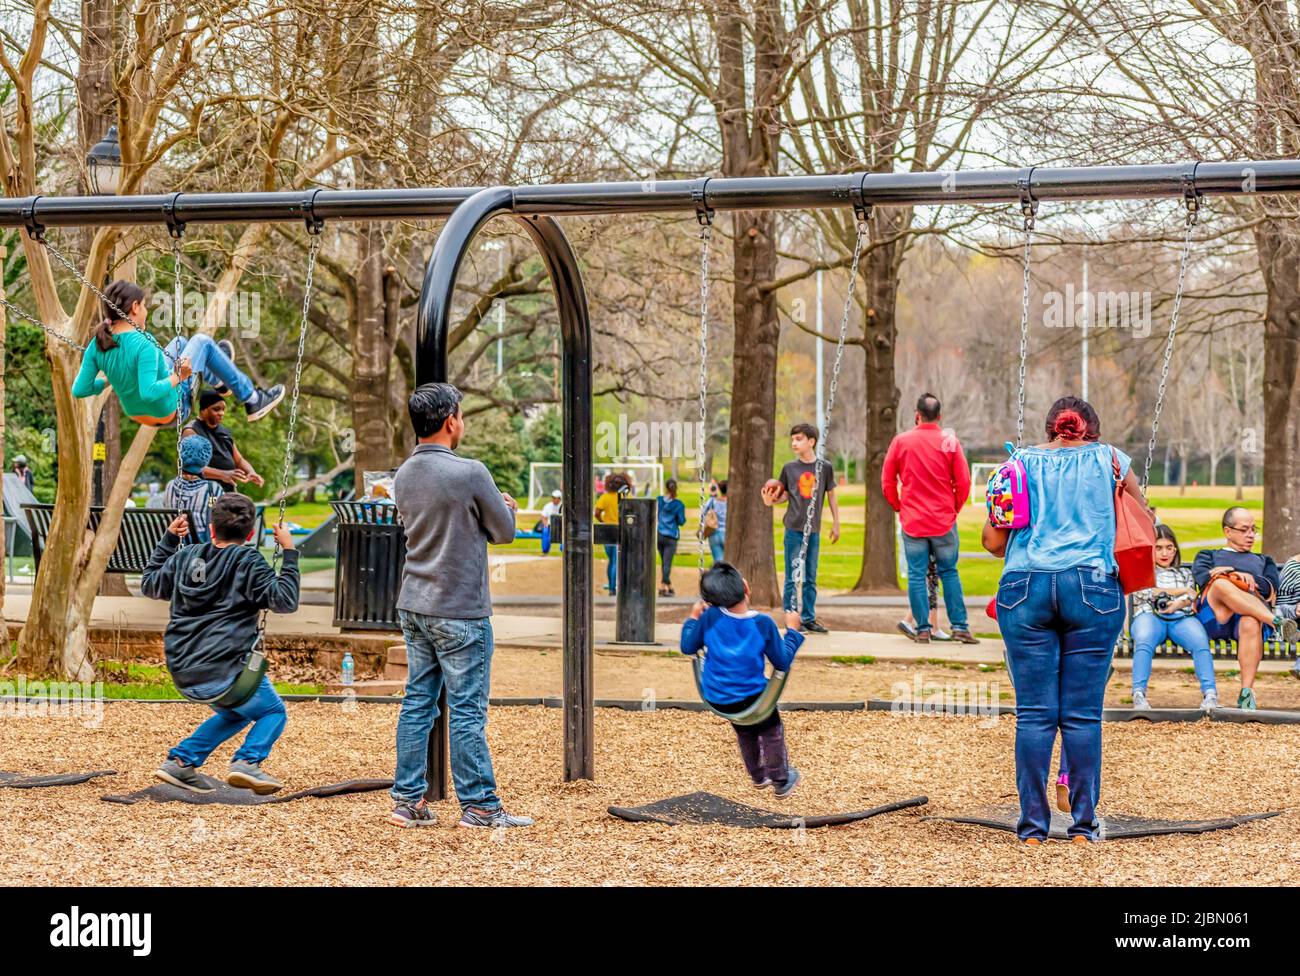 Charlotte, NC/USA - March 24, 2019: Families having fun together in Freedom Park.  Kids swinging on the swings while their parents watch protectively. Stock Photo